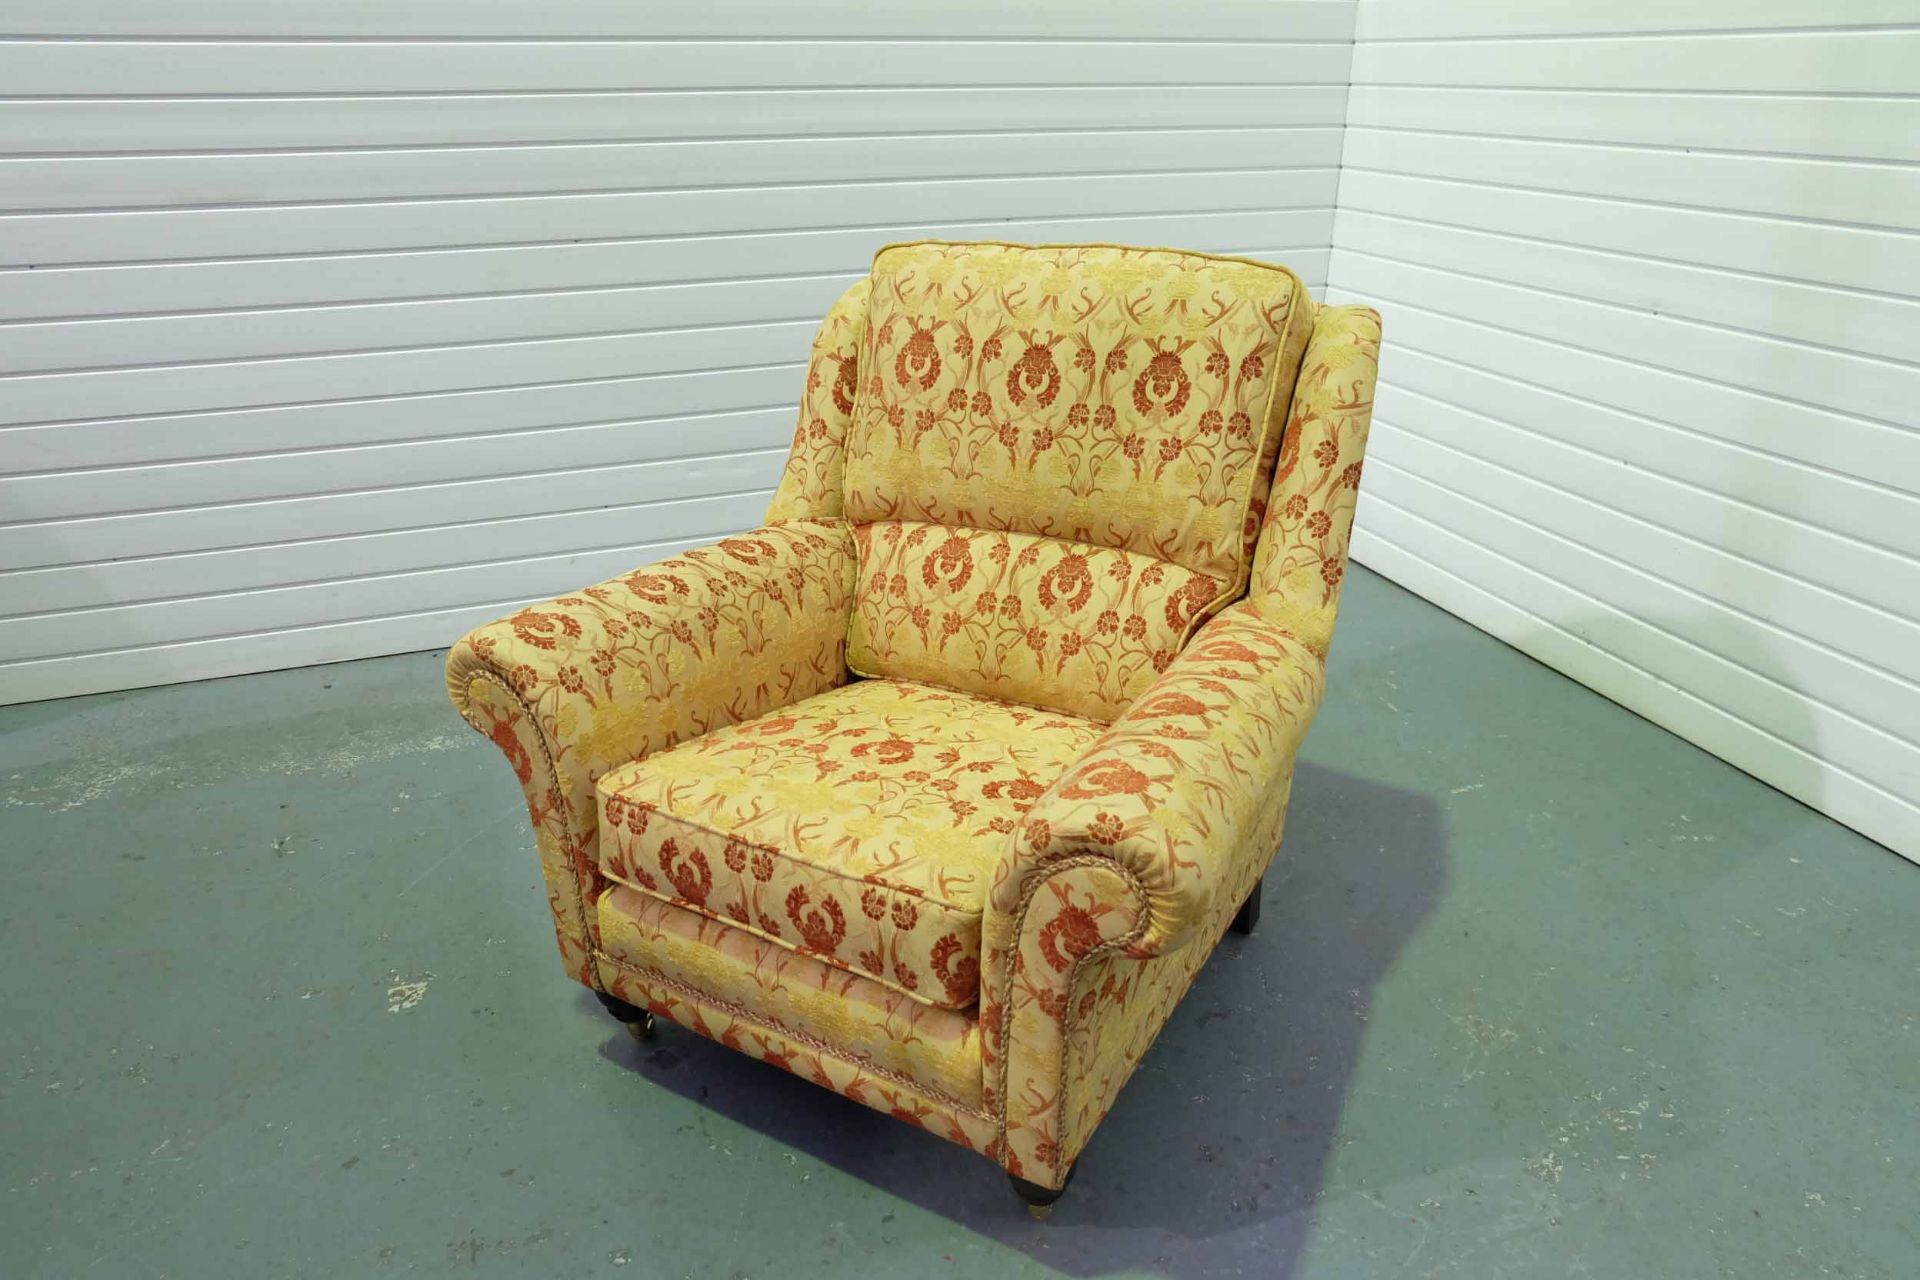 Steed Upholstery 'Lincoln' Range Fully Handmade Chair. Castor Wheels to the Front of the Chair. In J - Image 2 of 3